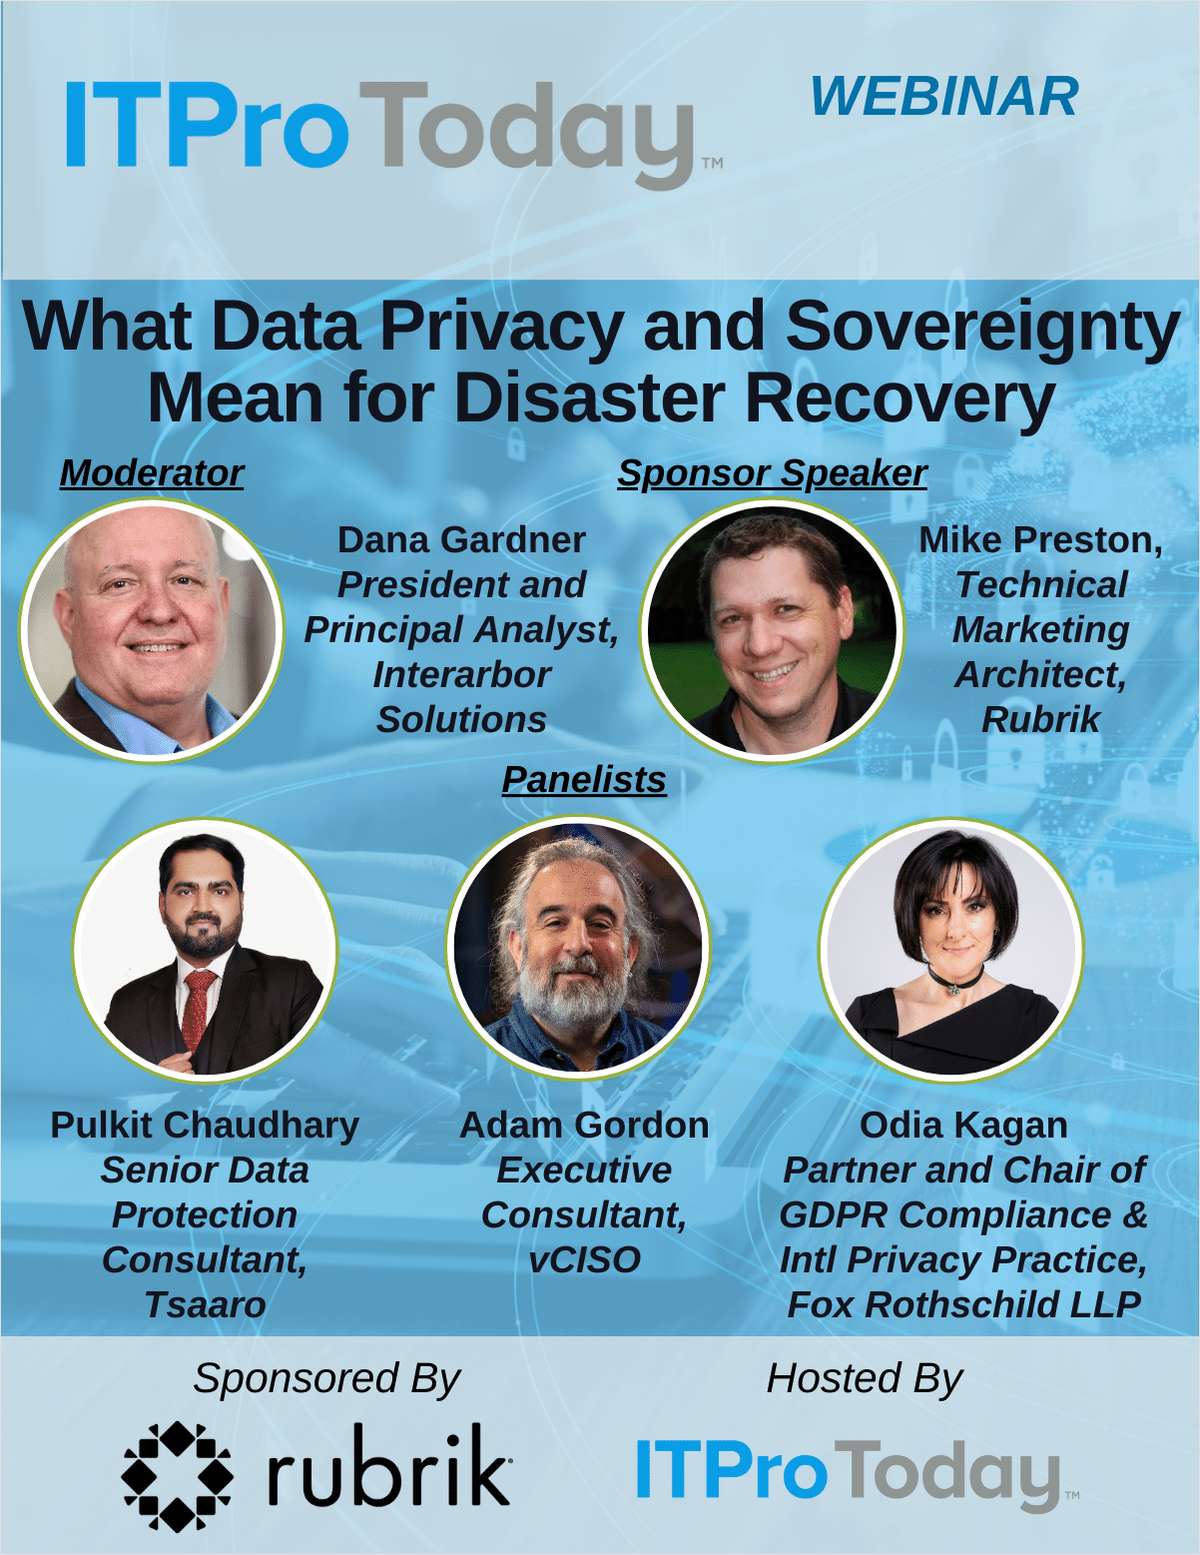 What Data Privacy and Sovereignty Mean for Disaster Recovery